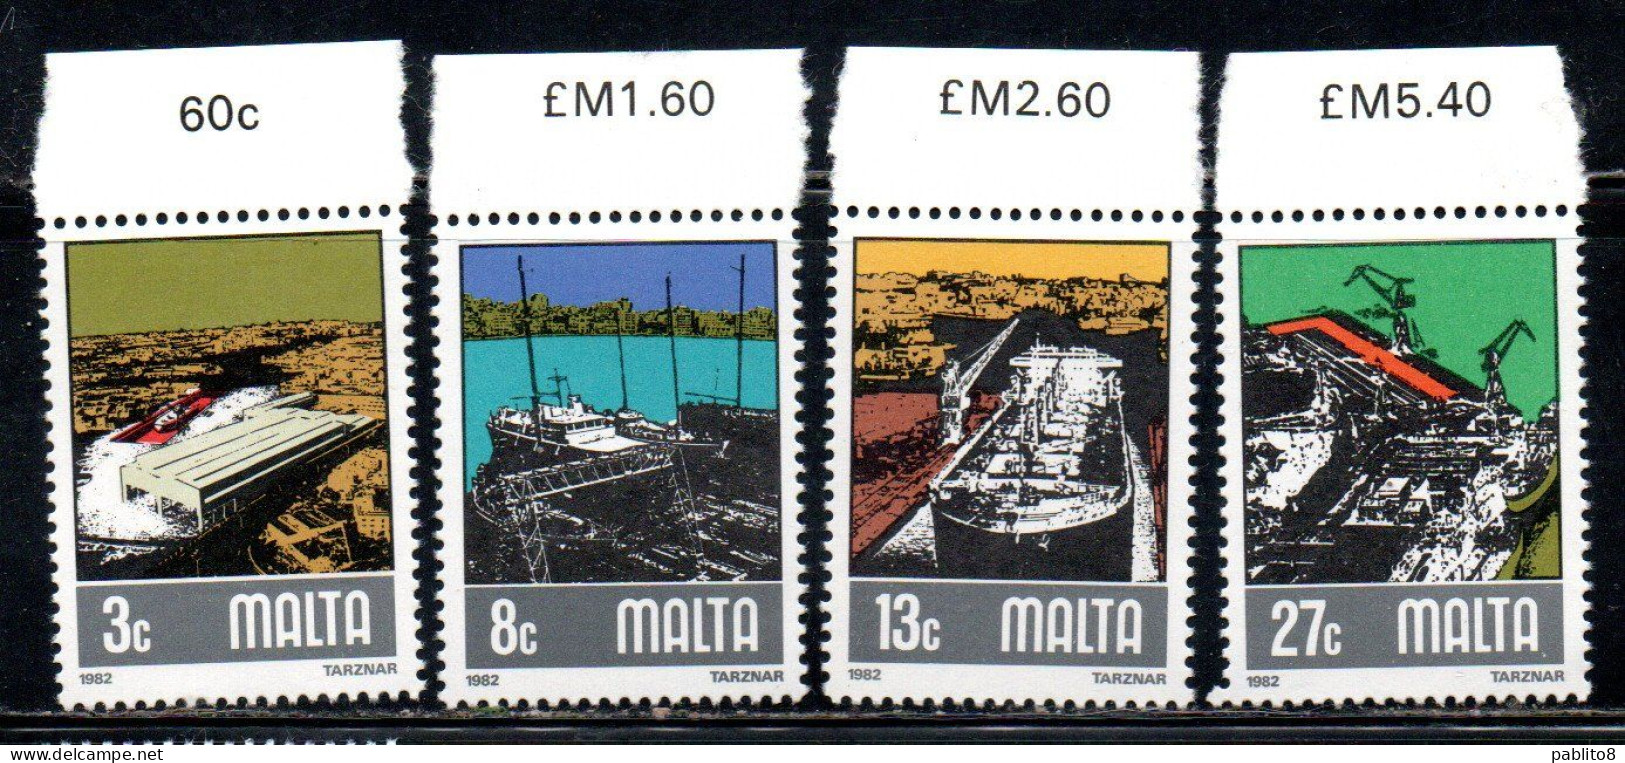 MALTA 1982 SHIPBUILDING AND REPAIRING, TARZNAR SHIPYARDS. ASSEMBLY CANTIERE NAVALE COMPLETE SET SERIE COMPLETA MNH - Malte